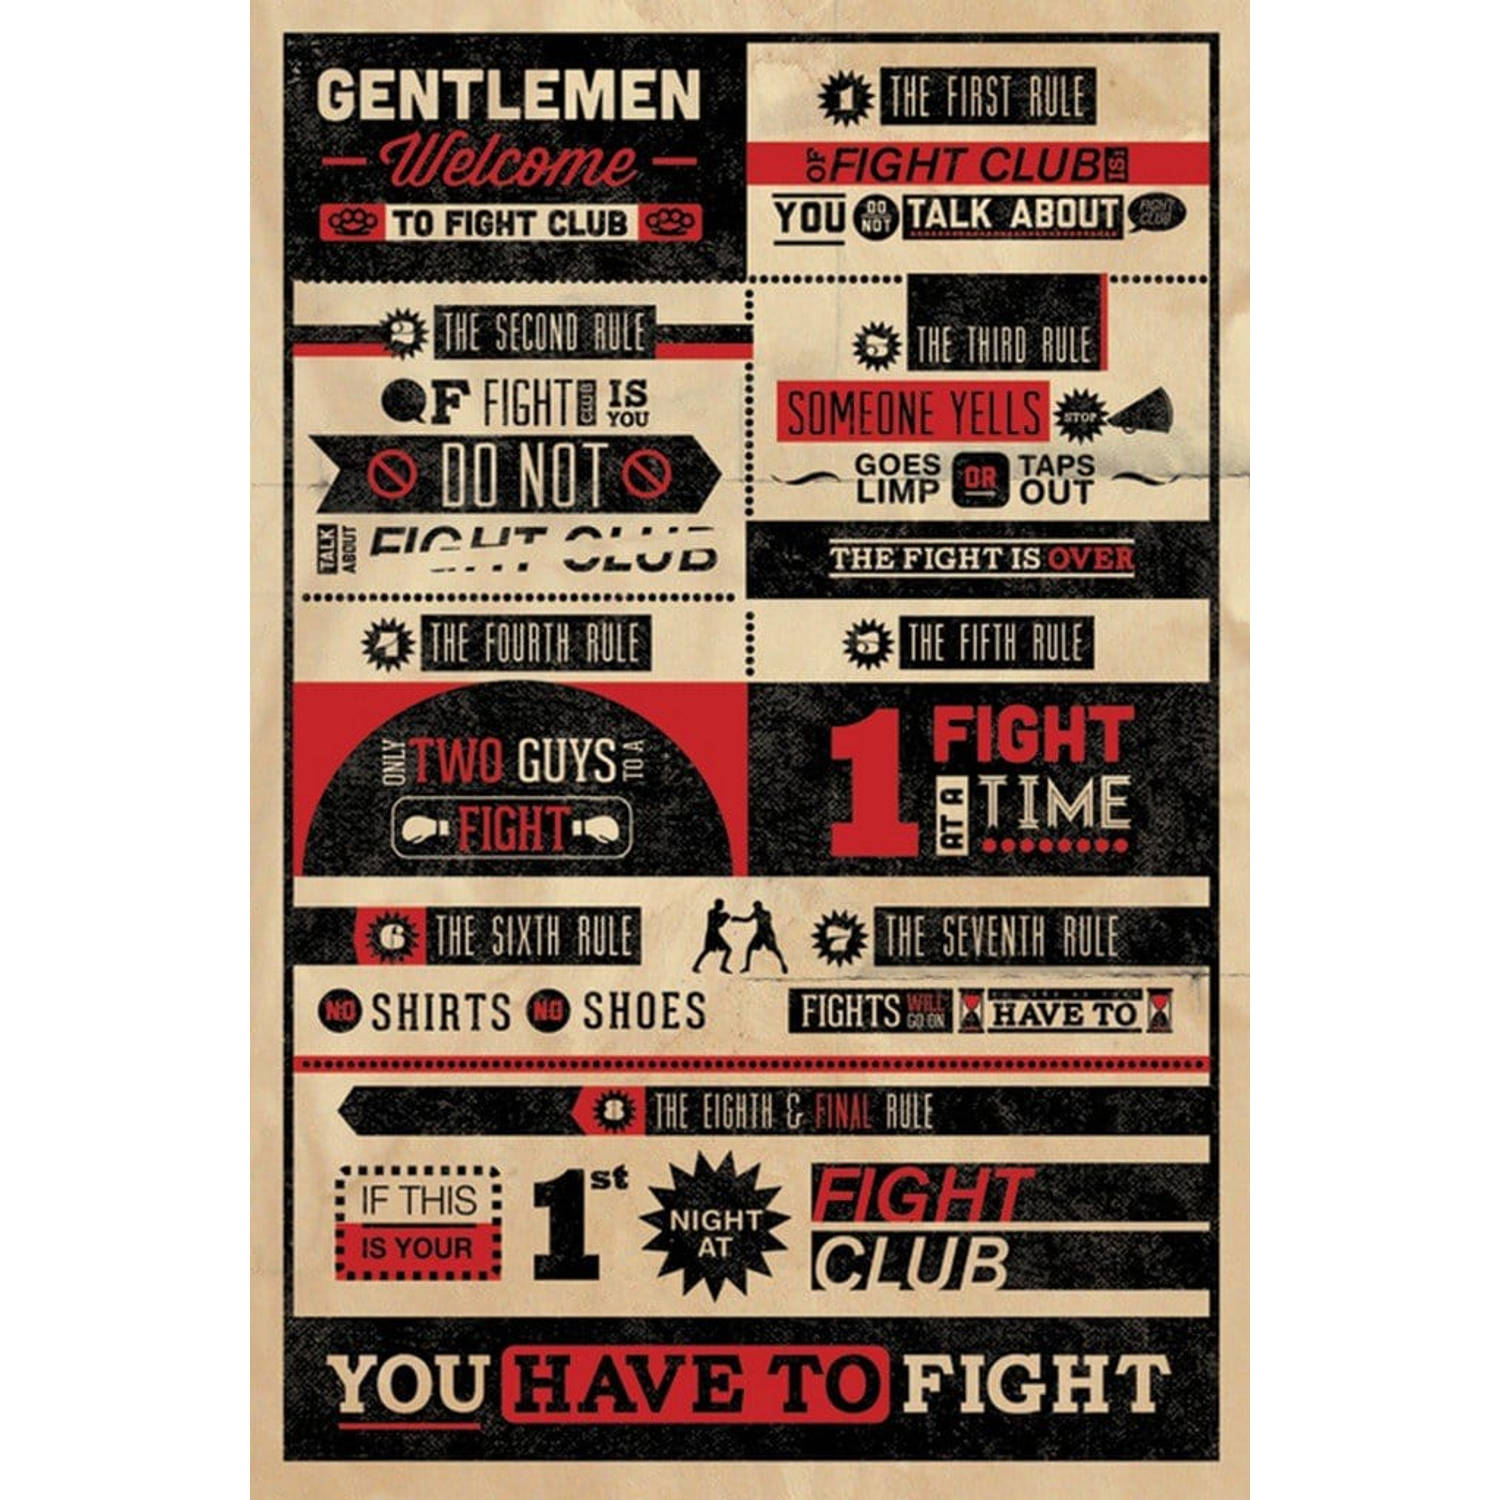 Fight Club Rules Infographic 24 x 36 Inches Maxi Poster